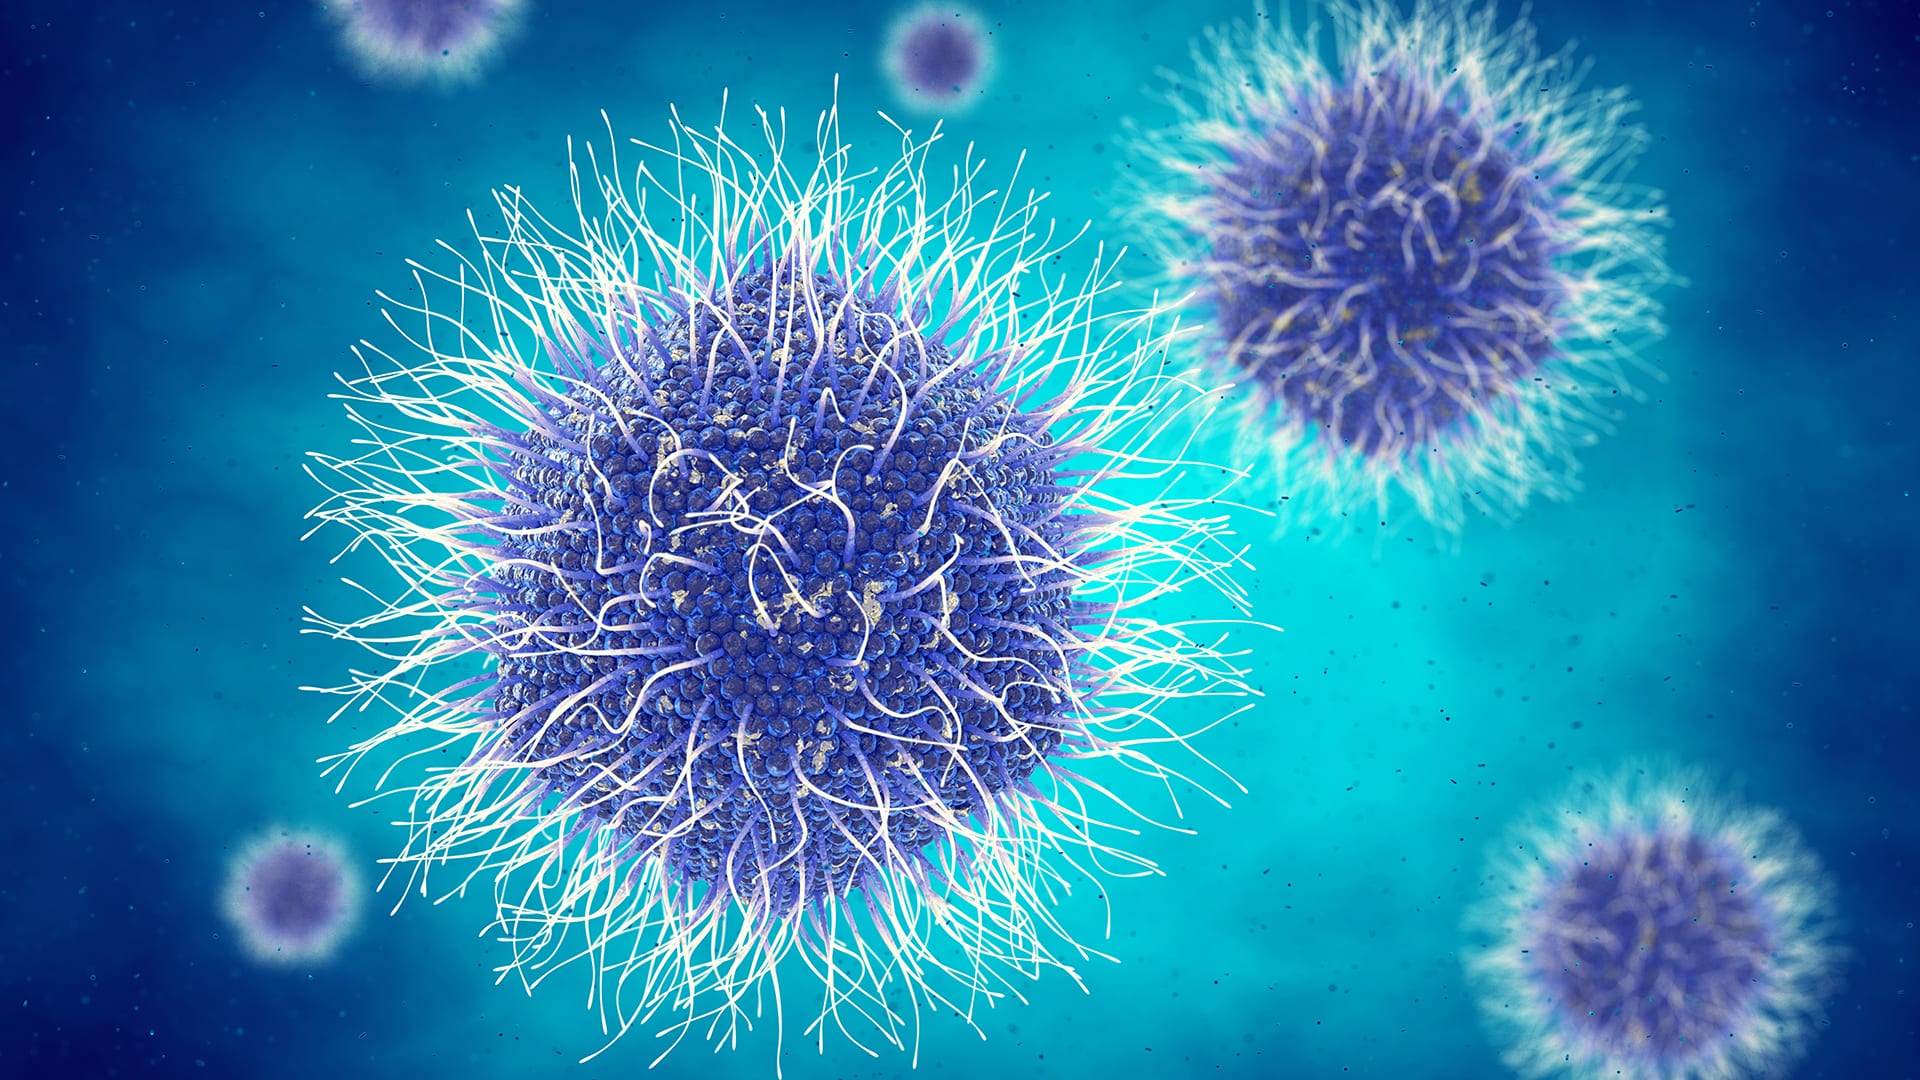 An illustration of an organism infected with the giant virus known as Mimivirus. Credit: Shutterstock